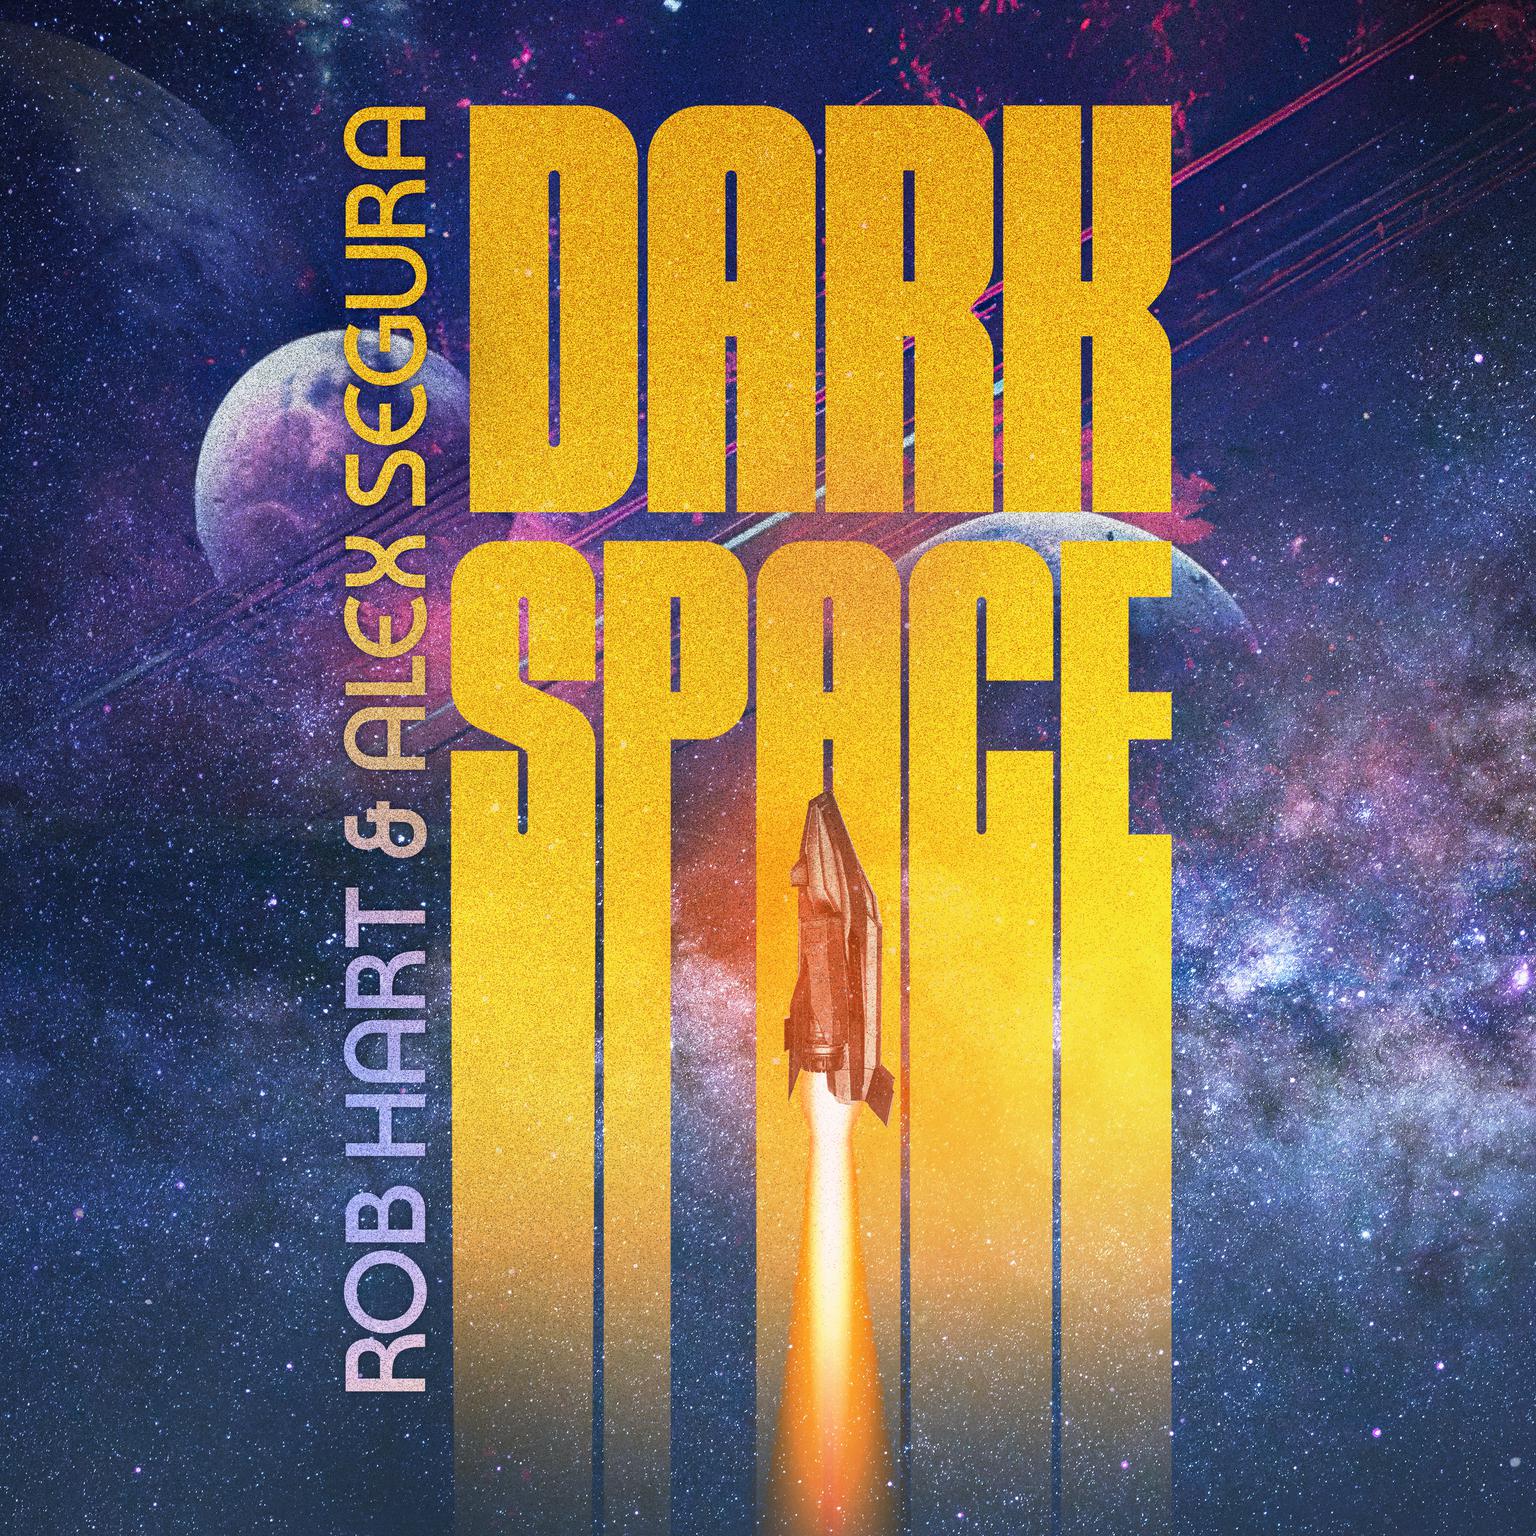 Dark Space Audiobook, by Rob Hart